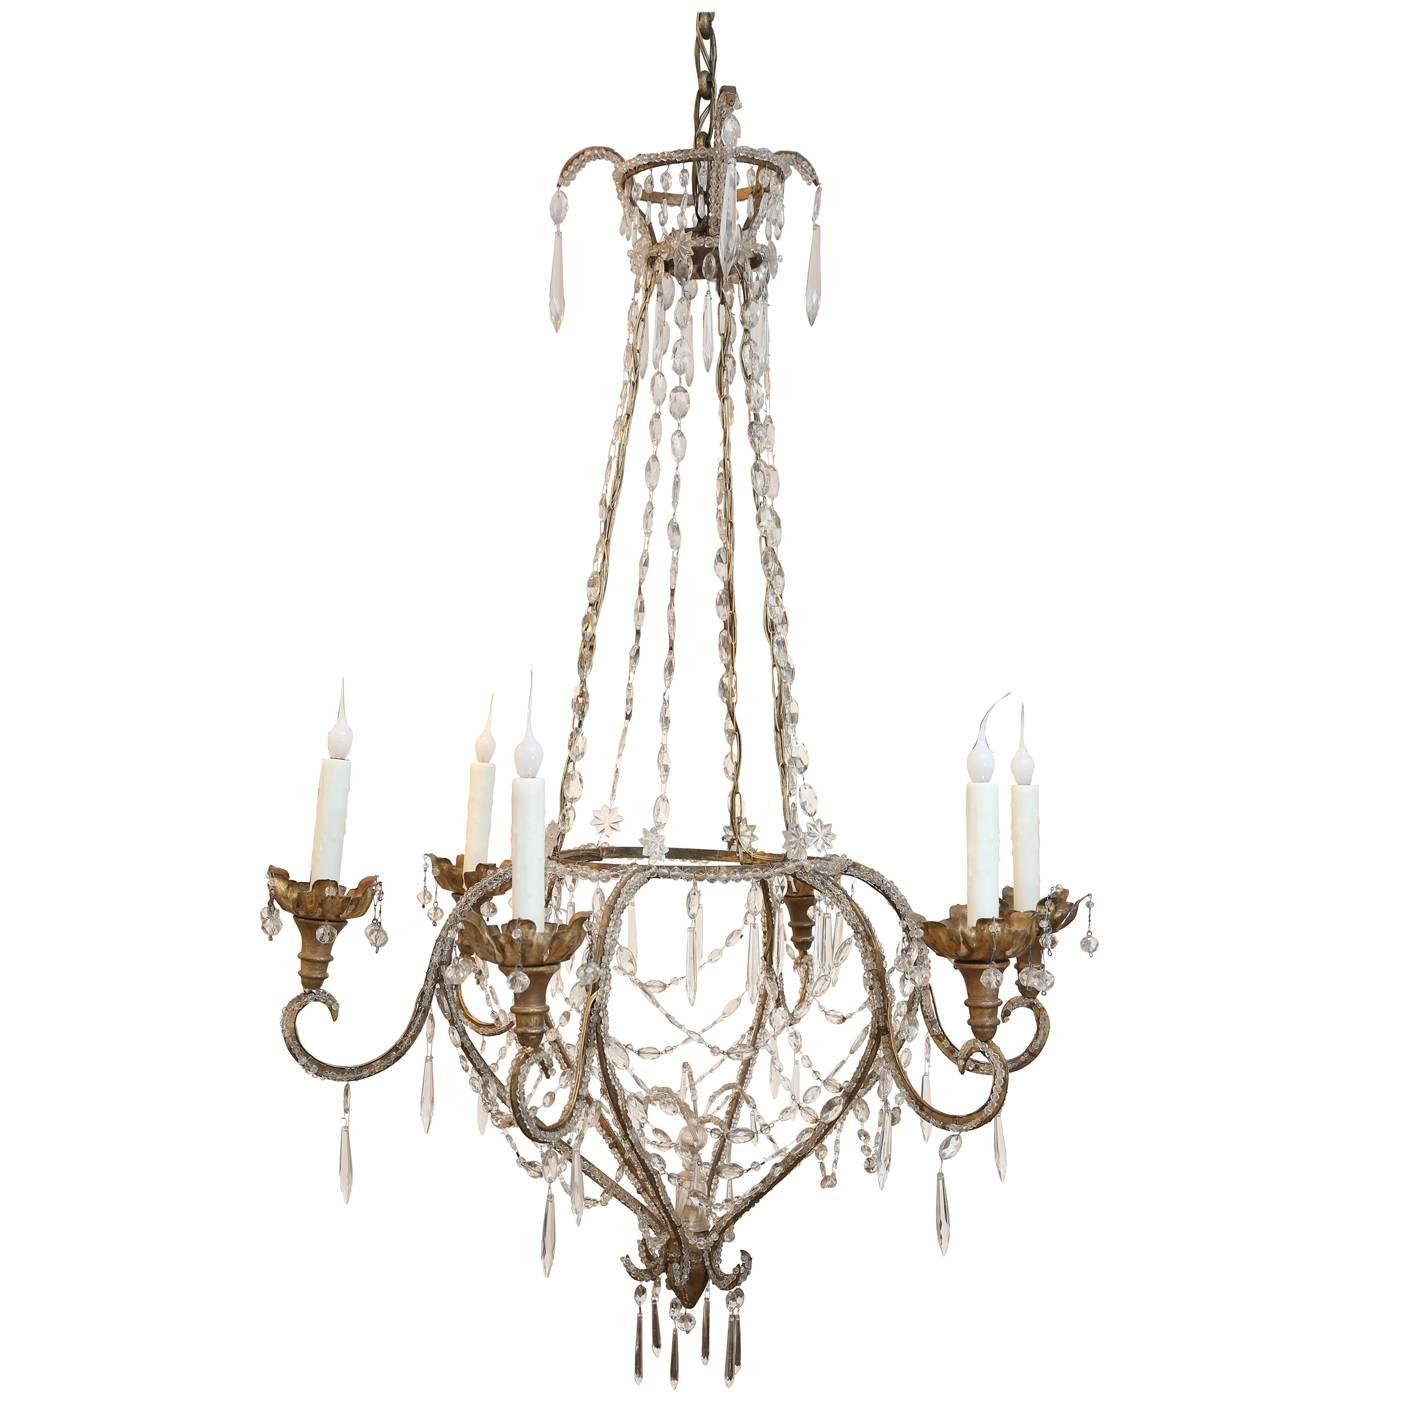 Beaded and gilt iron Italian chandelier from Genoa (early 19th century), in original finish and featuring a connecting basket/cage round structure and upper tier, fully beaded with original and antique glass beads and decorated with crystal